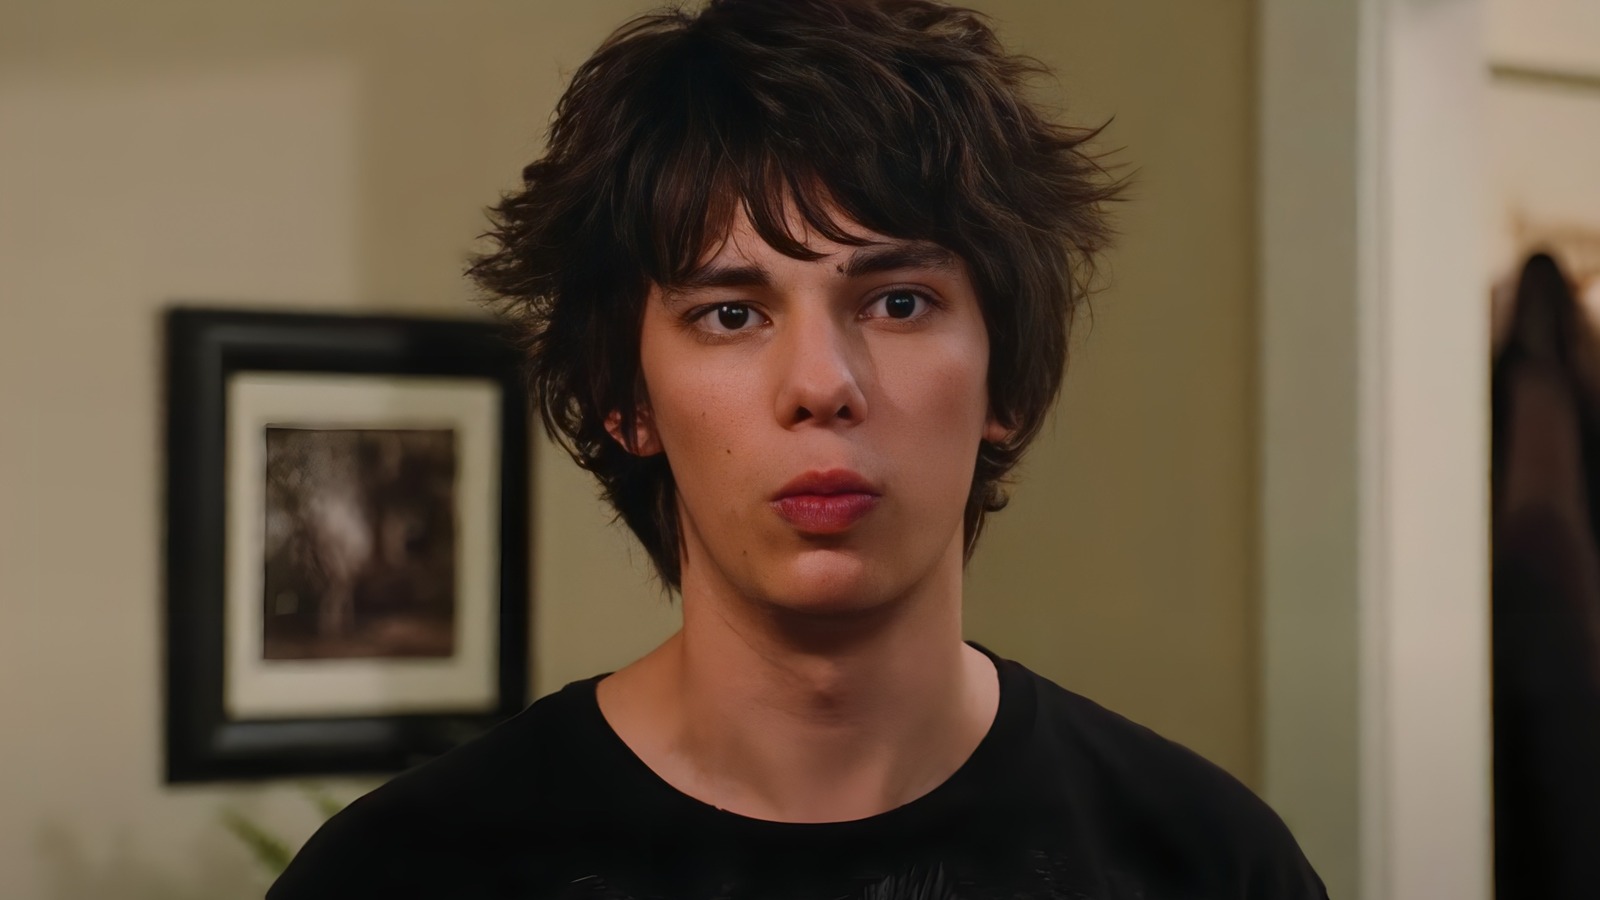 Who Plays Rodrick Heffley In The Dairy Of A Wimpy Kid Franchise?